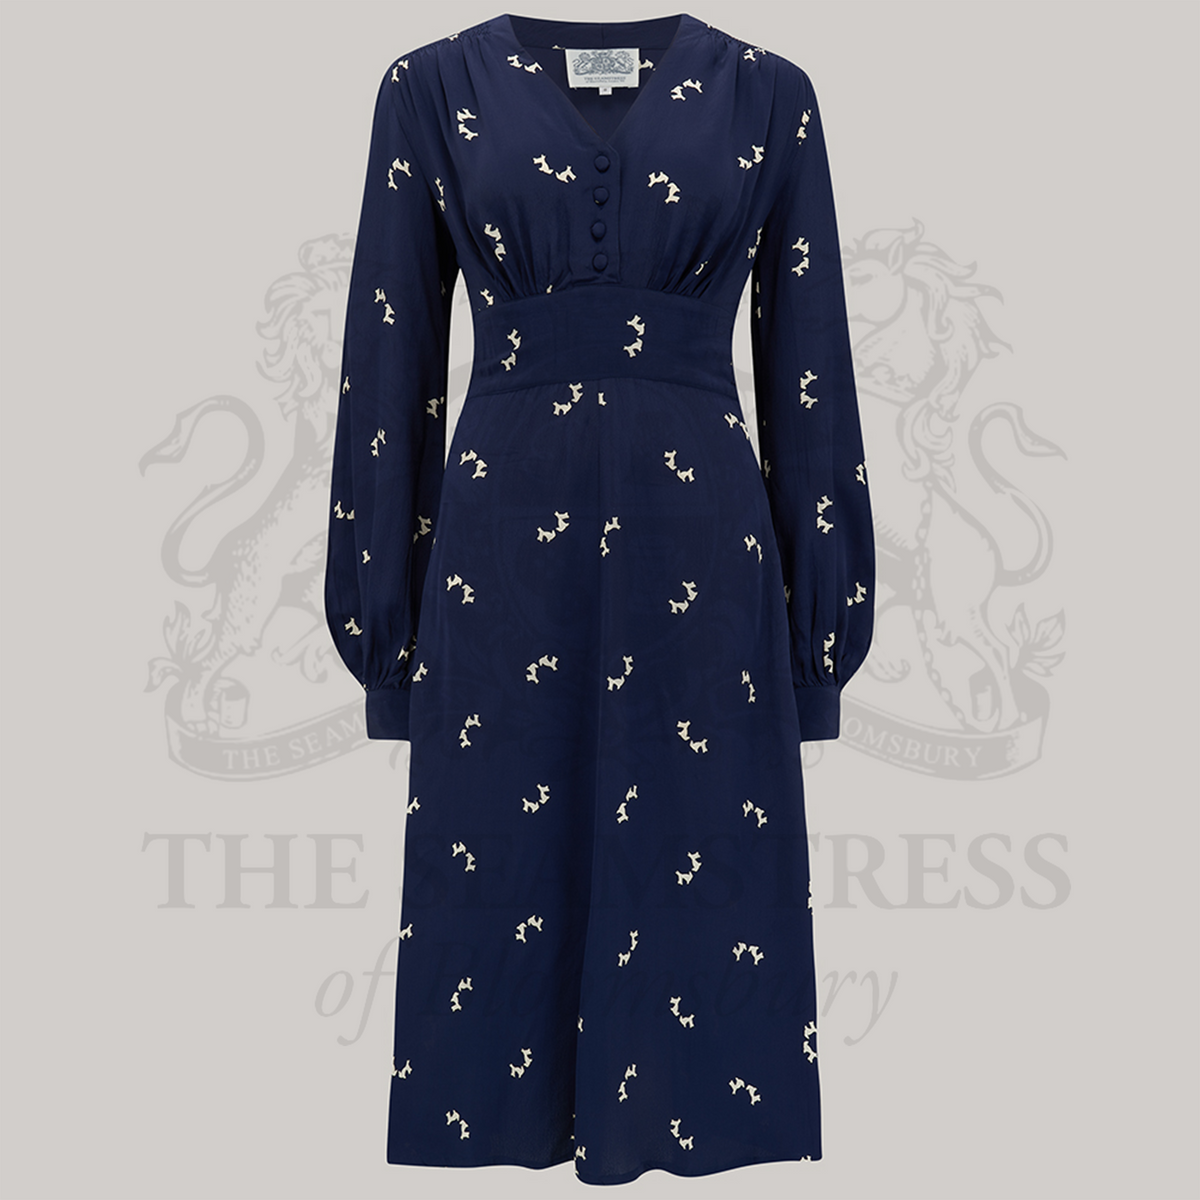 A 1940s style long sleeve dress in navy with small scotty dogs. Featuring gauged-in top yoke detailing on the shoulders and sleeves that puff out fully at the cuff. 4 small buttons down the front of the dress, and a tie-waist belt. 